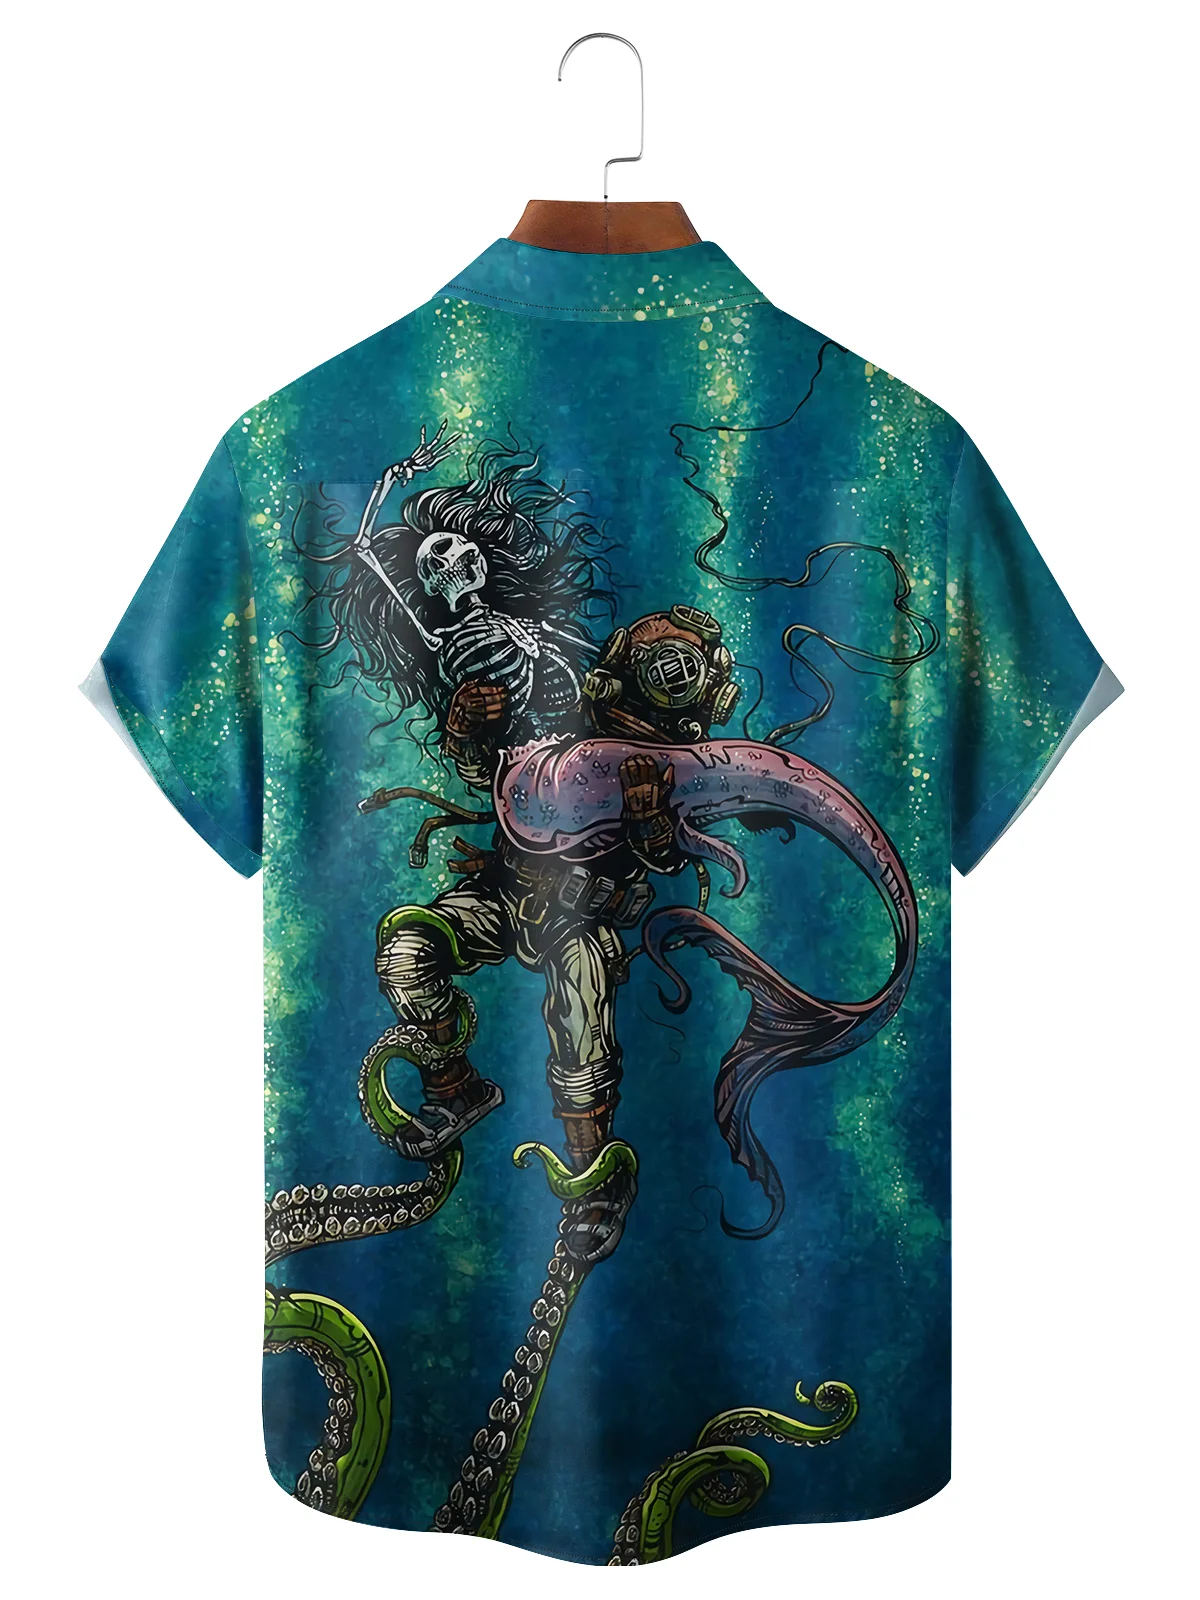 Catch Or Release Shirt By David Lozeau